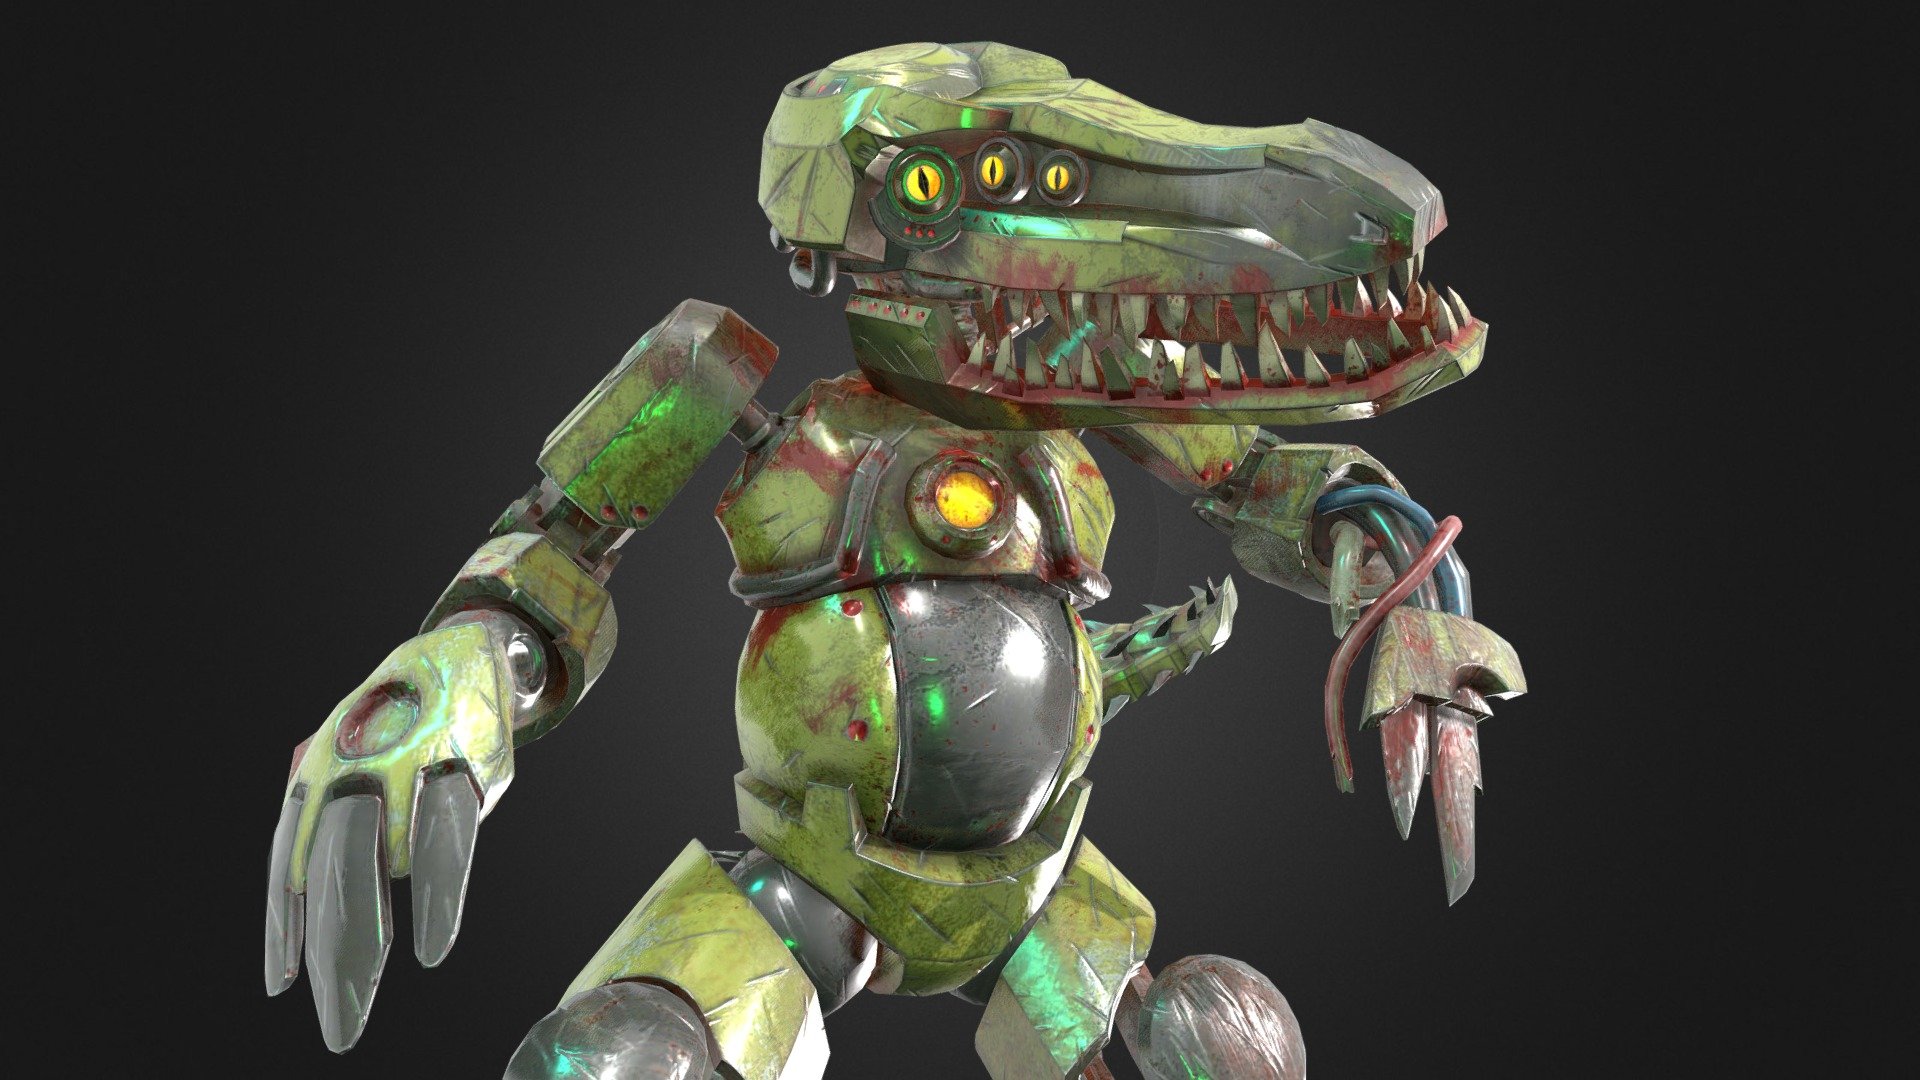 model by: ©Walnut LLC

All rights reserved: ©Walnut LLC

the game where the model comes out: CASE 2: Animatronics Survival https://store.steampowered.com/app/722960/CASE_2_Animatronics_Survival/ - Croc Case 2 - 3D model by JackG205_2 3d model